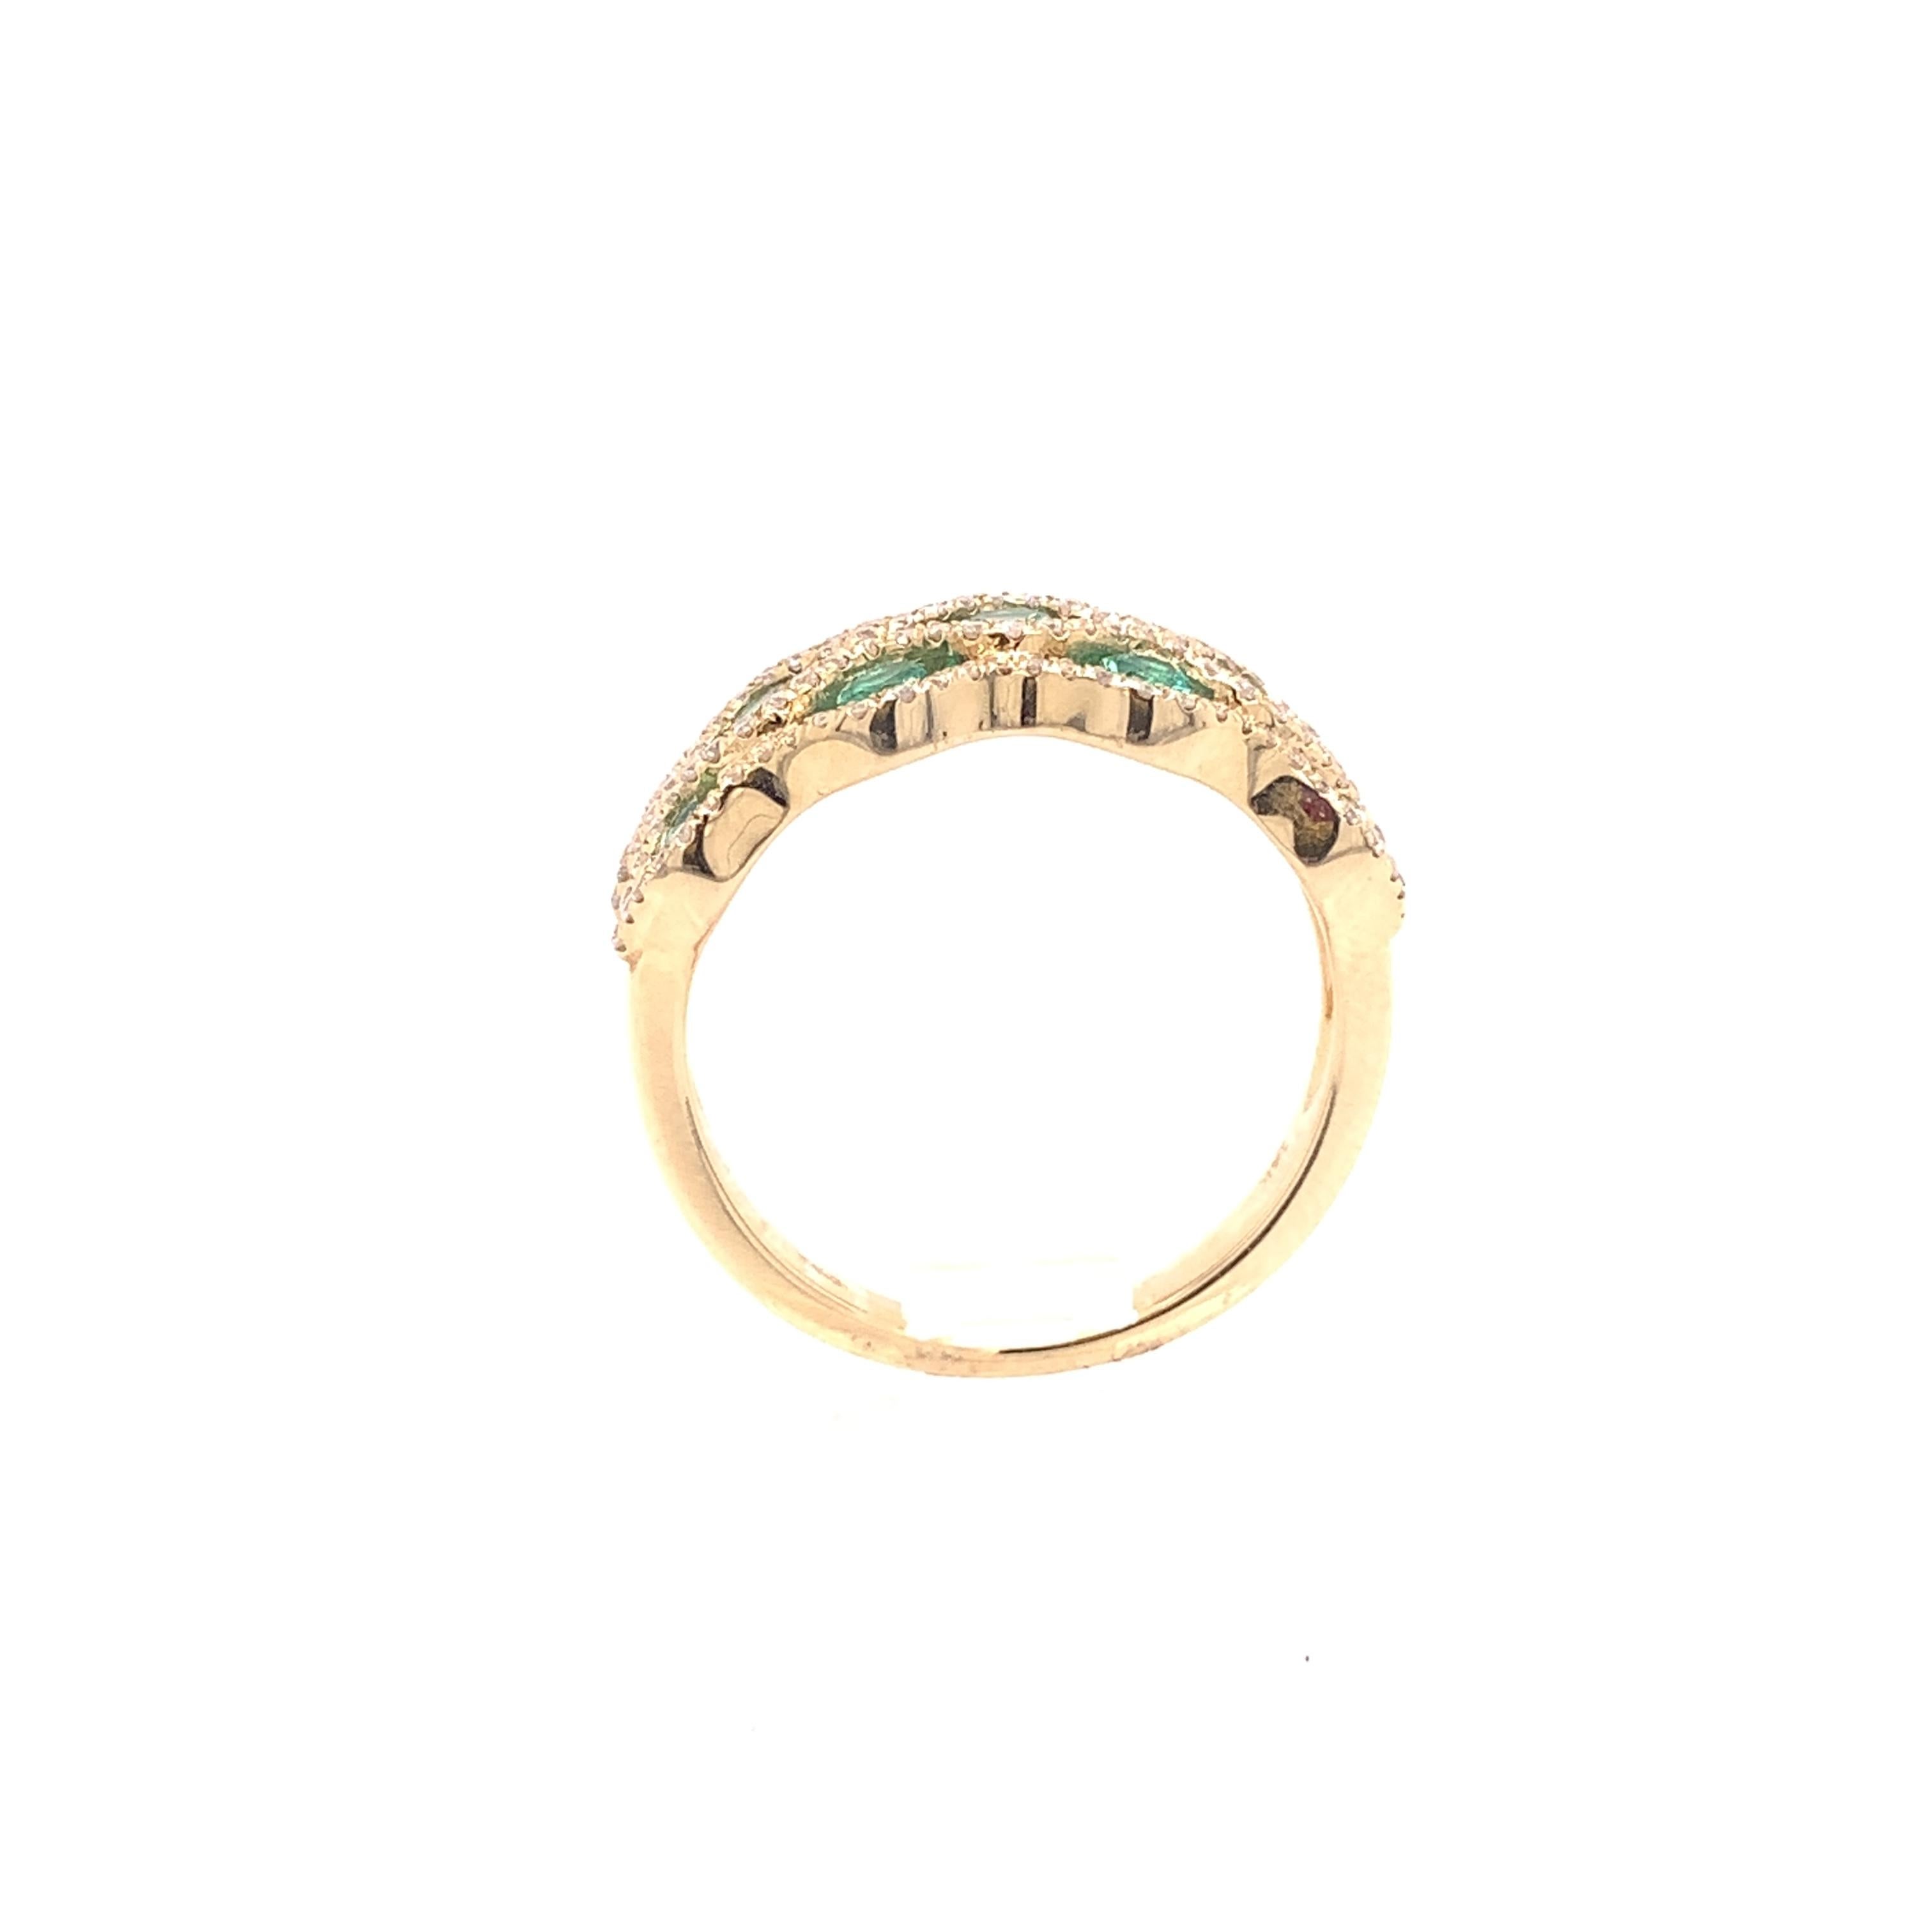 A stunning cocktail ring crafted in 14 karat yellow gold with 11 round natural transparent emerald stones weighing approximately 0.66 carats. The measurements for these stones are 1.80 - 2.40mm. This ring also contains 118 natural round brilliant